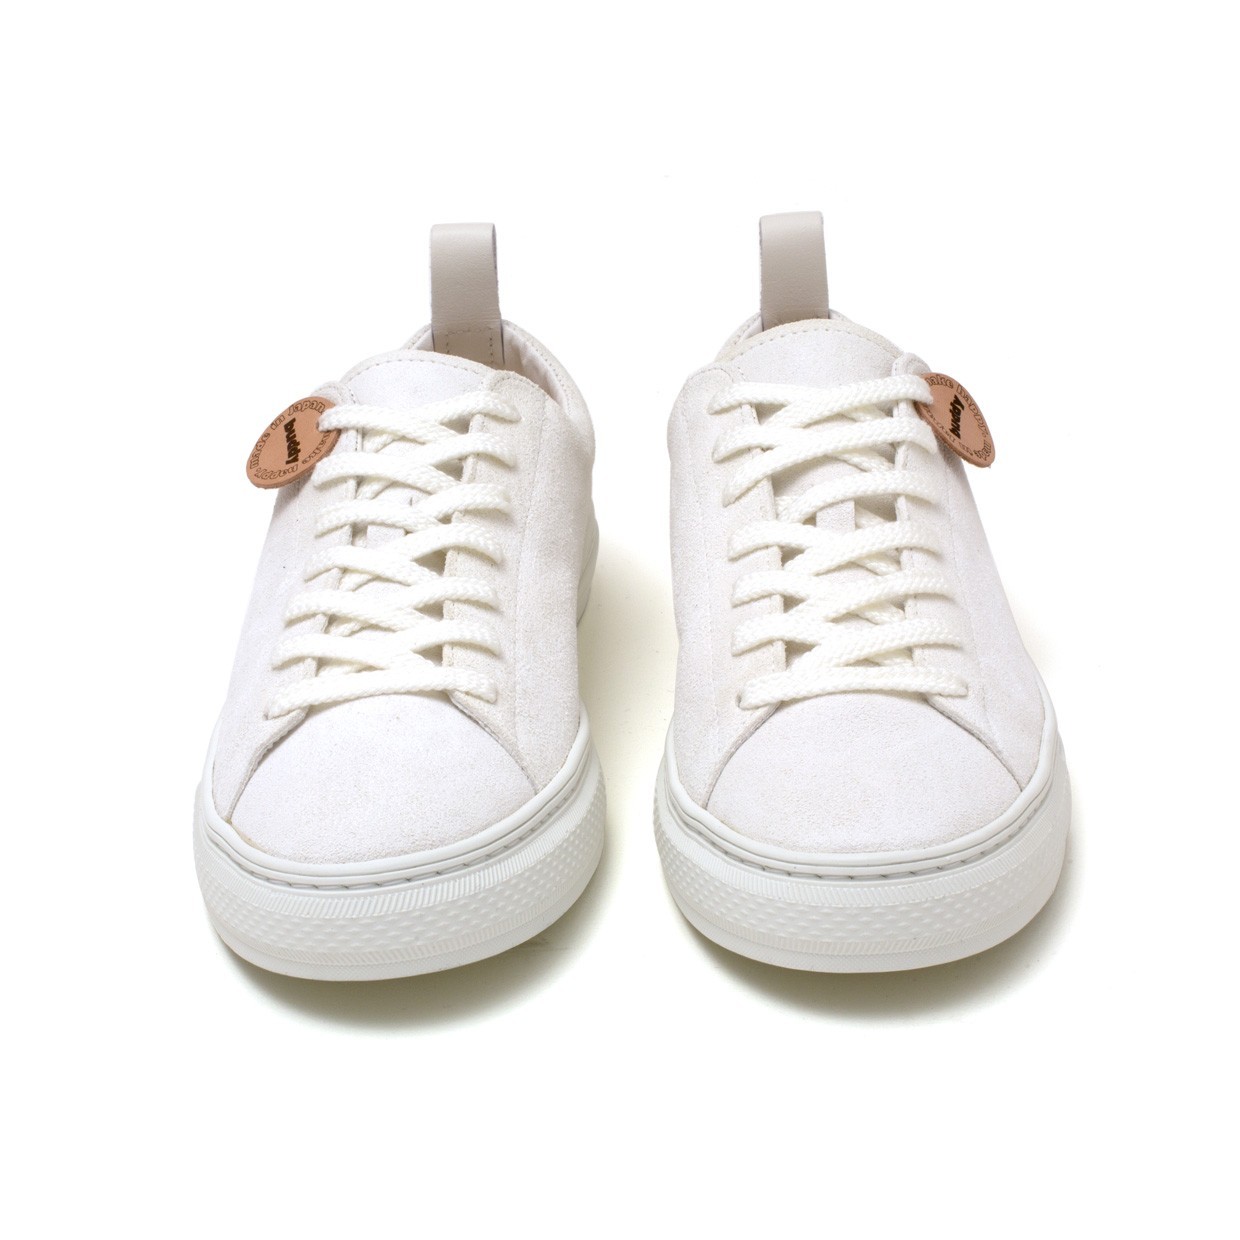 Bull Terrier Low Chubby White Suede